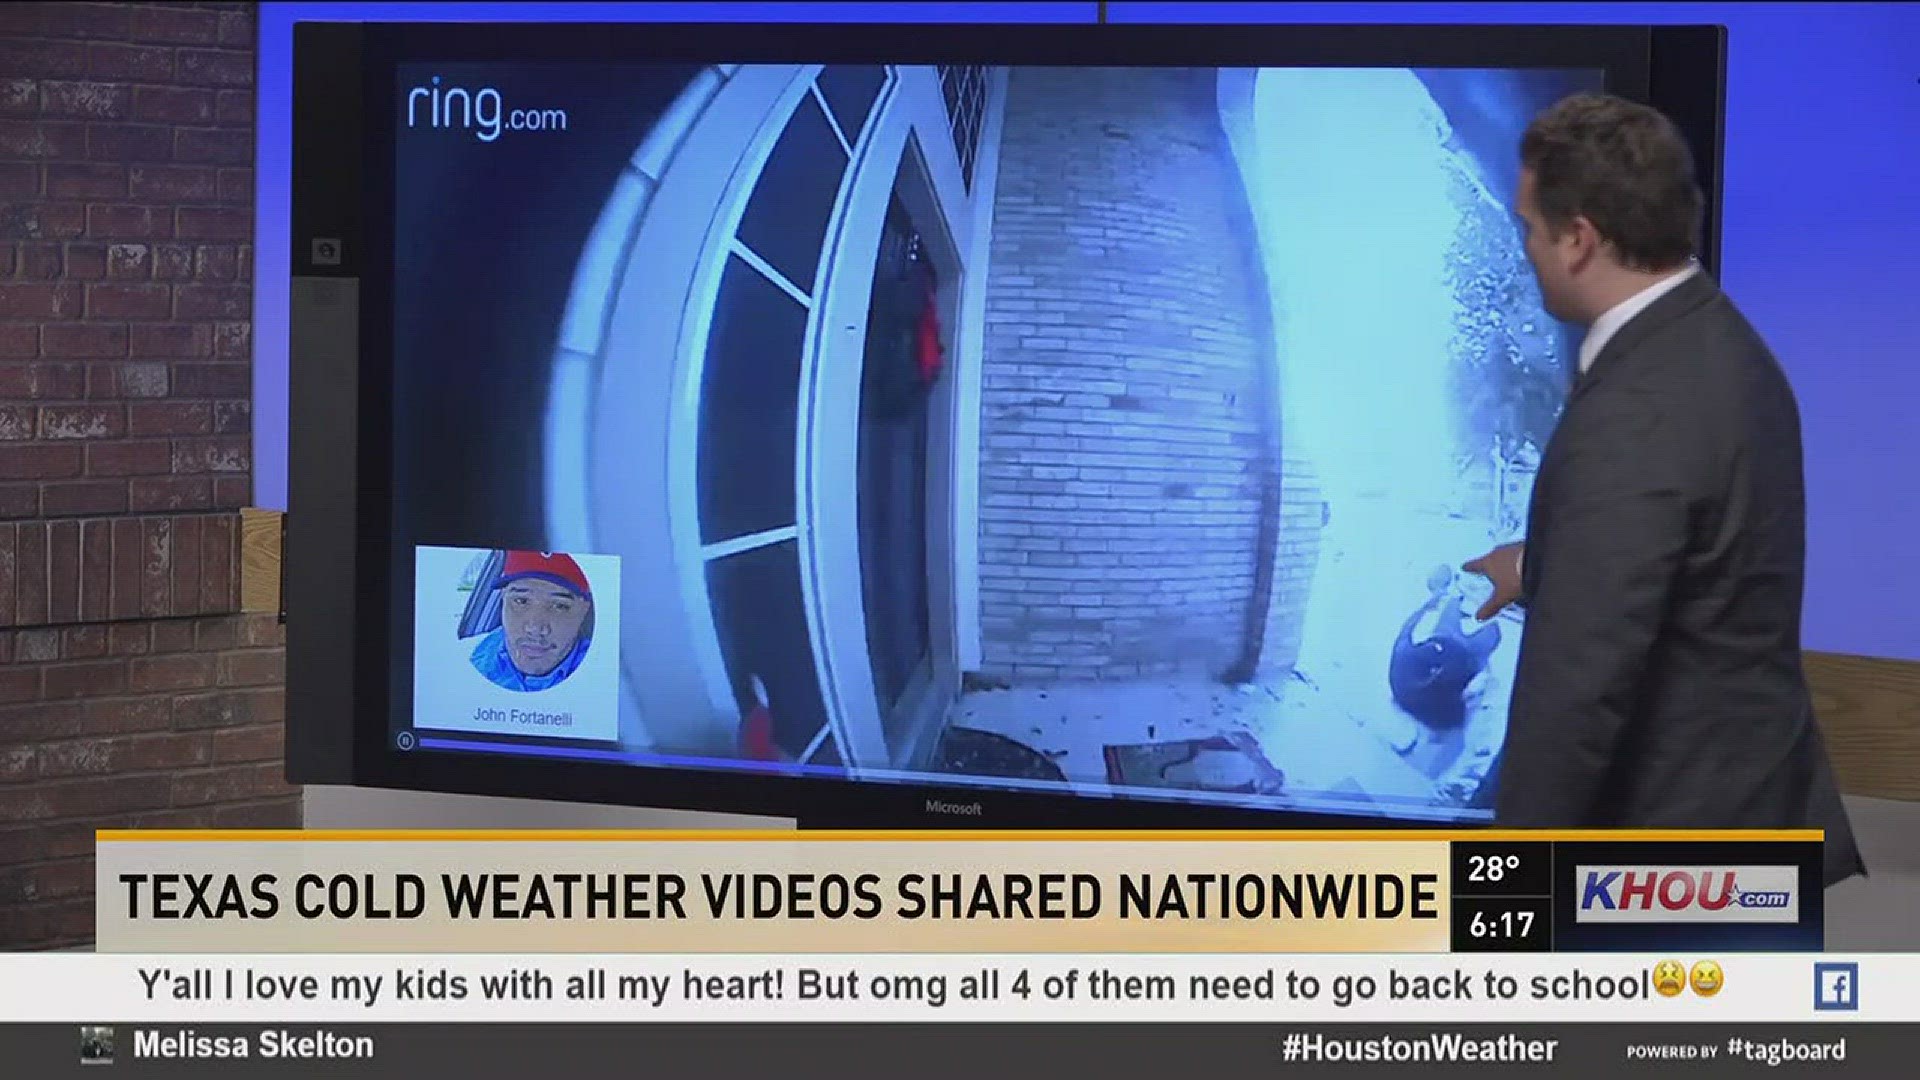 KHOU 11's Doug Delony shows off a few of the viral videos from the chilly weather across Texas